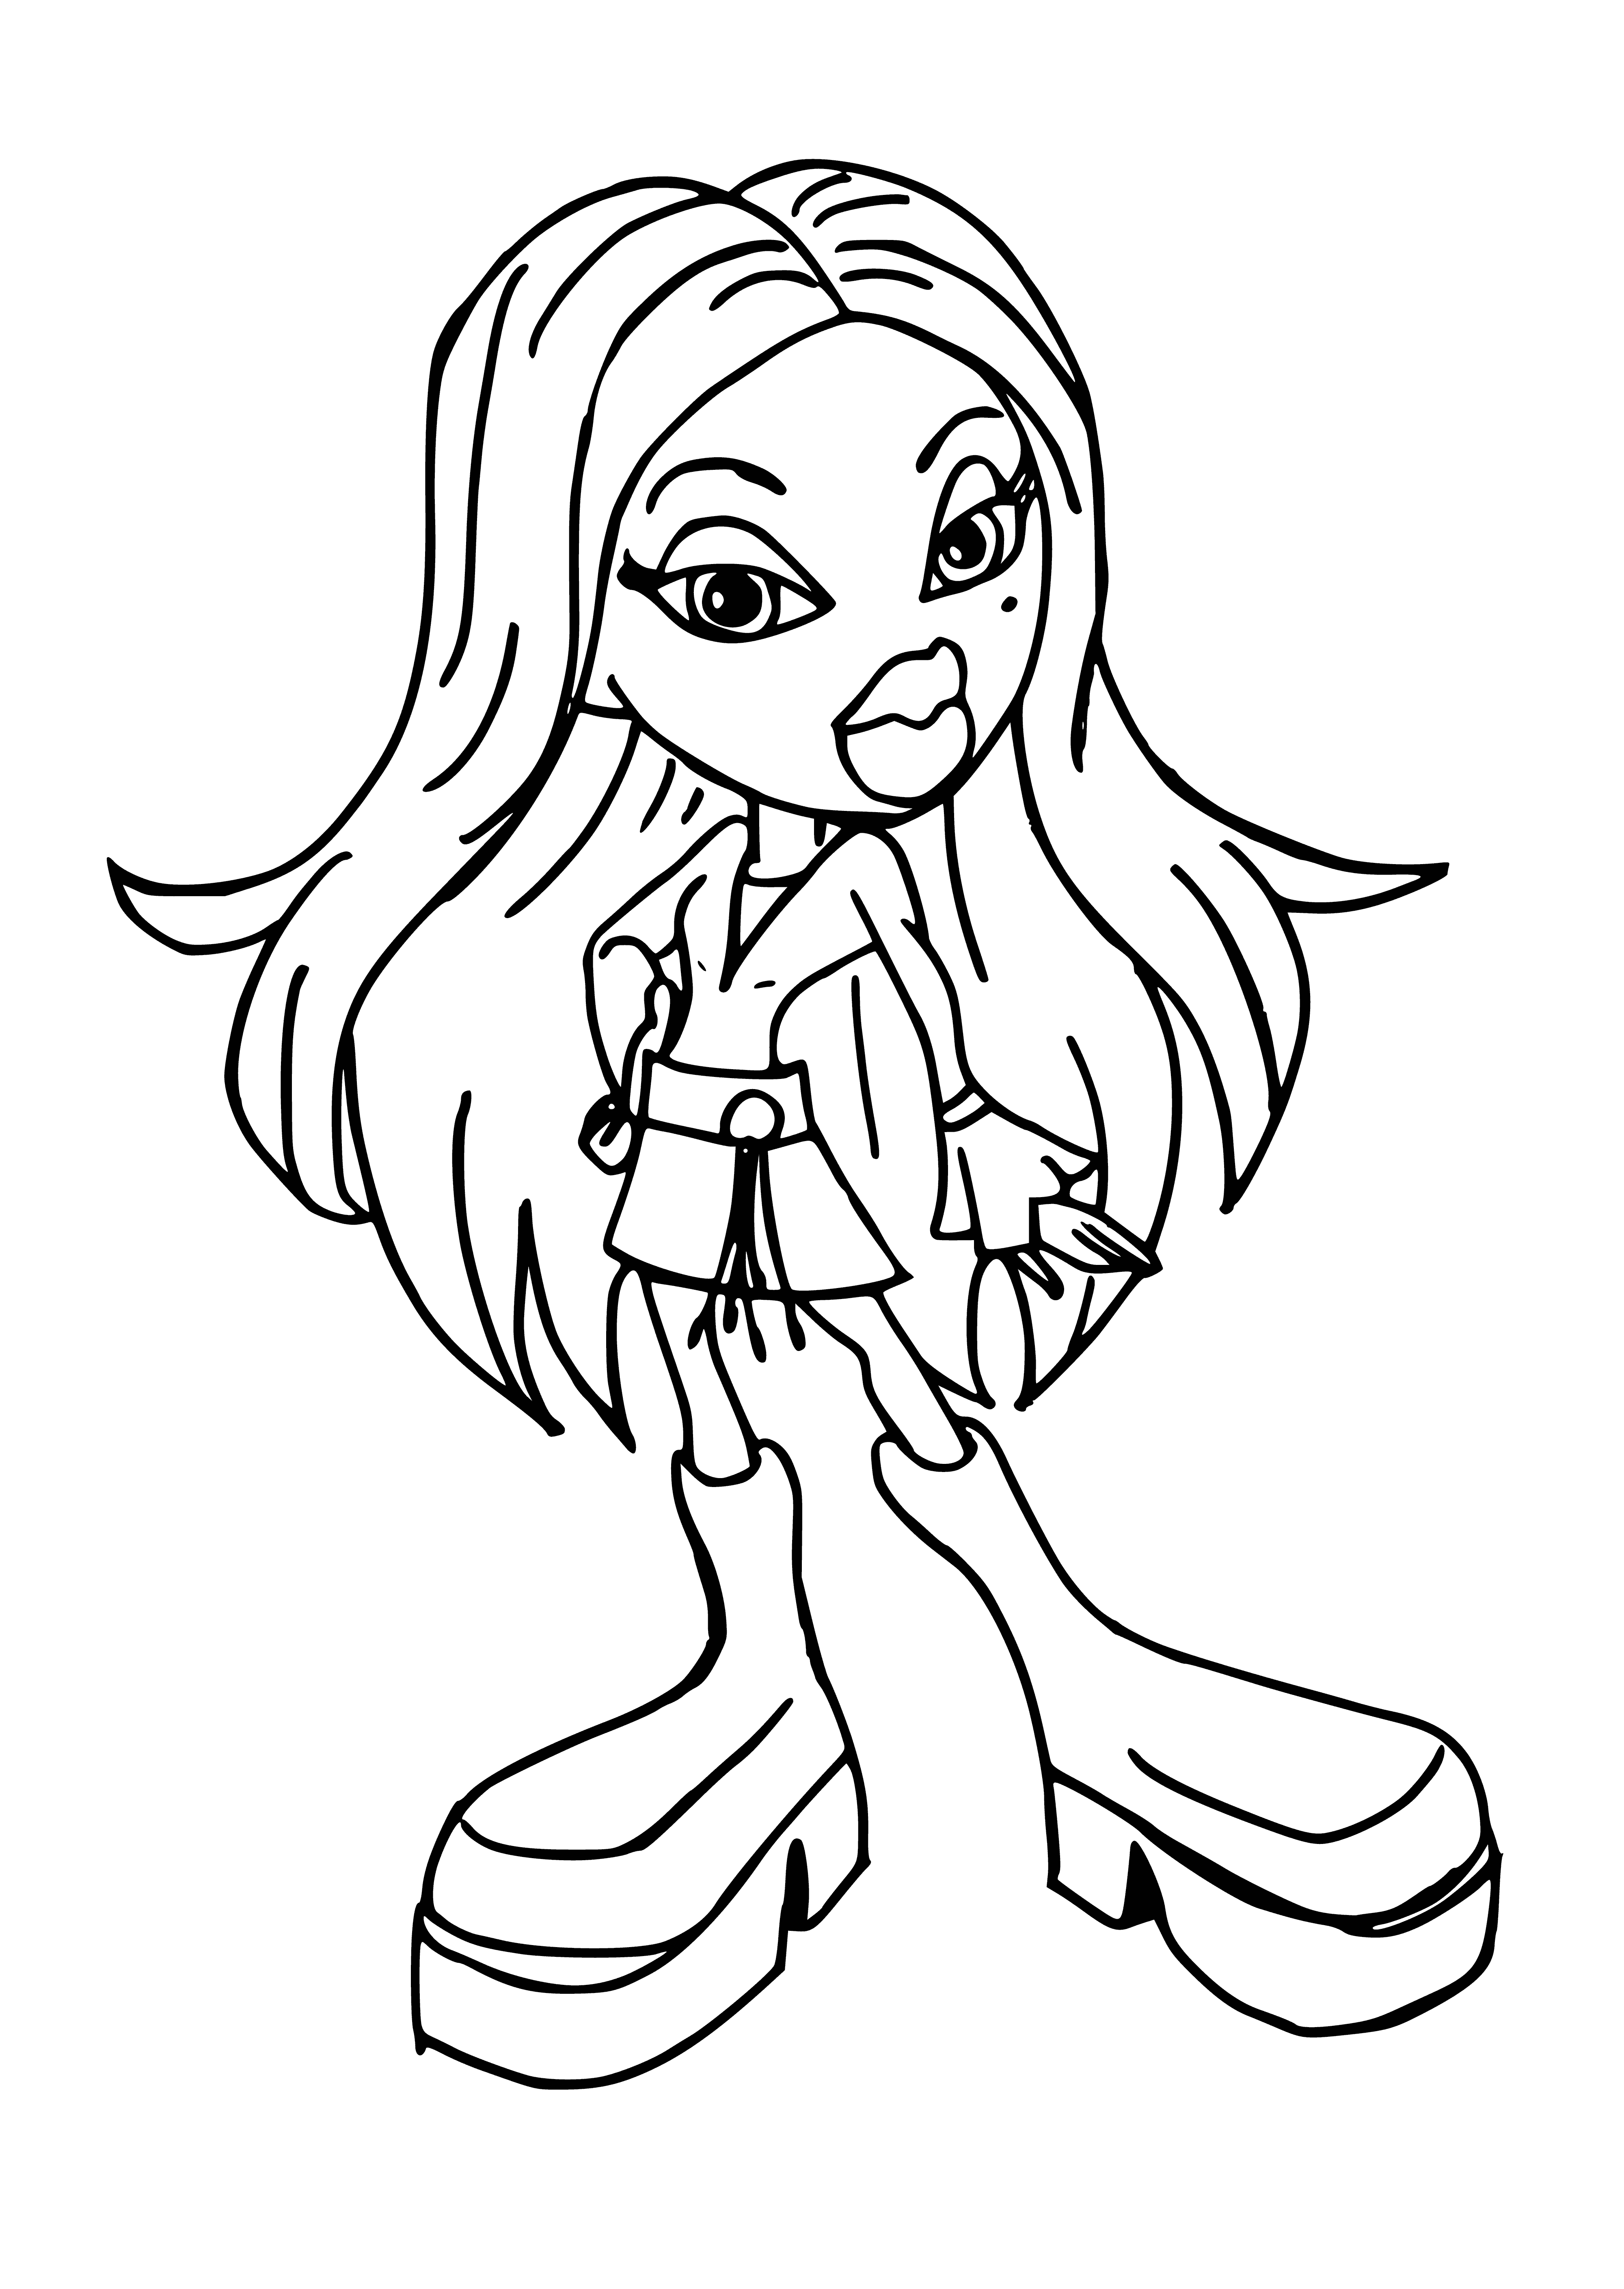 coloring page: Jasmine is one of the Bratz - big eyes, long wavy hair partially pulled back, wearing a white tank top & colorful printed sarong, hoop earrings & pink nails.